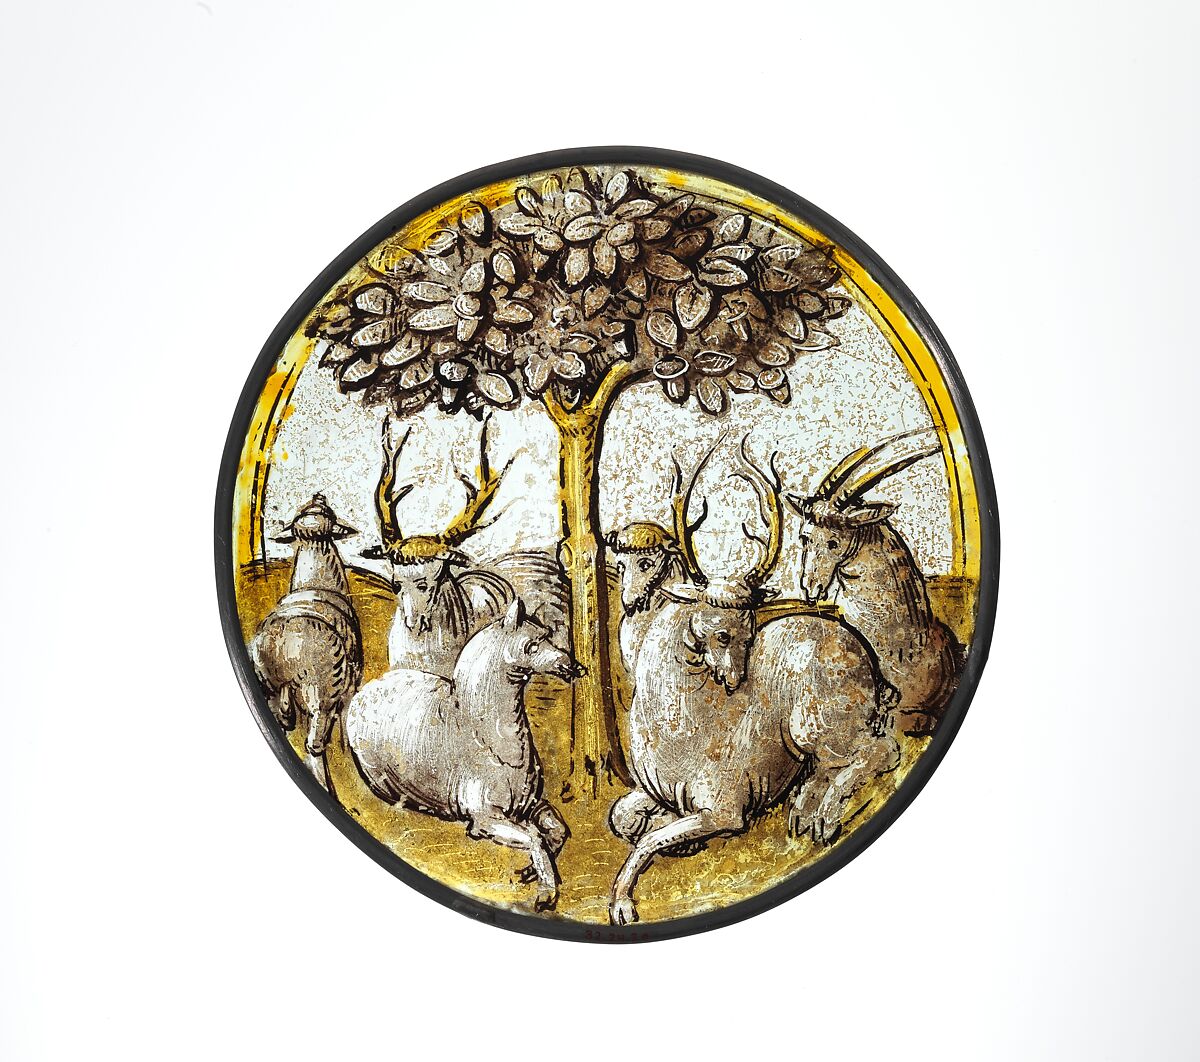 Roundel with Pastoral Scene, Colorless glass, vitreous paint and silver stain, British (?) 